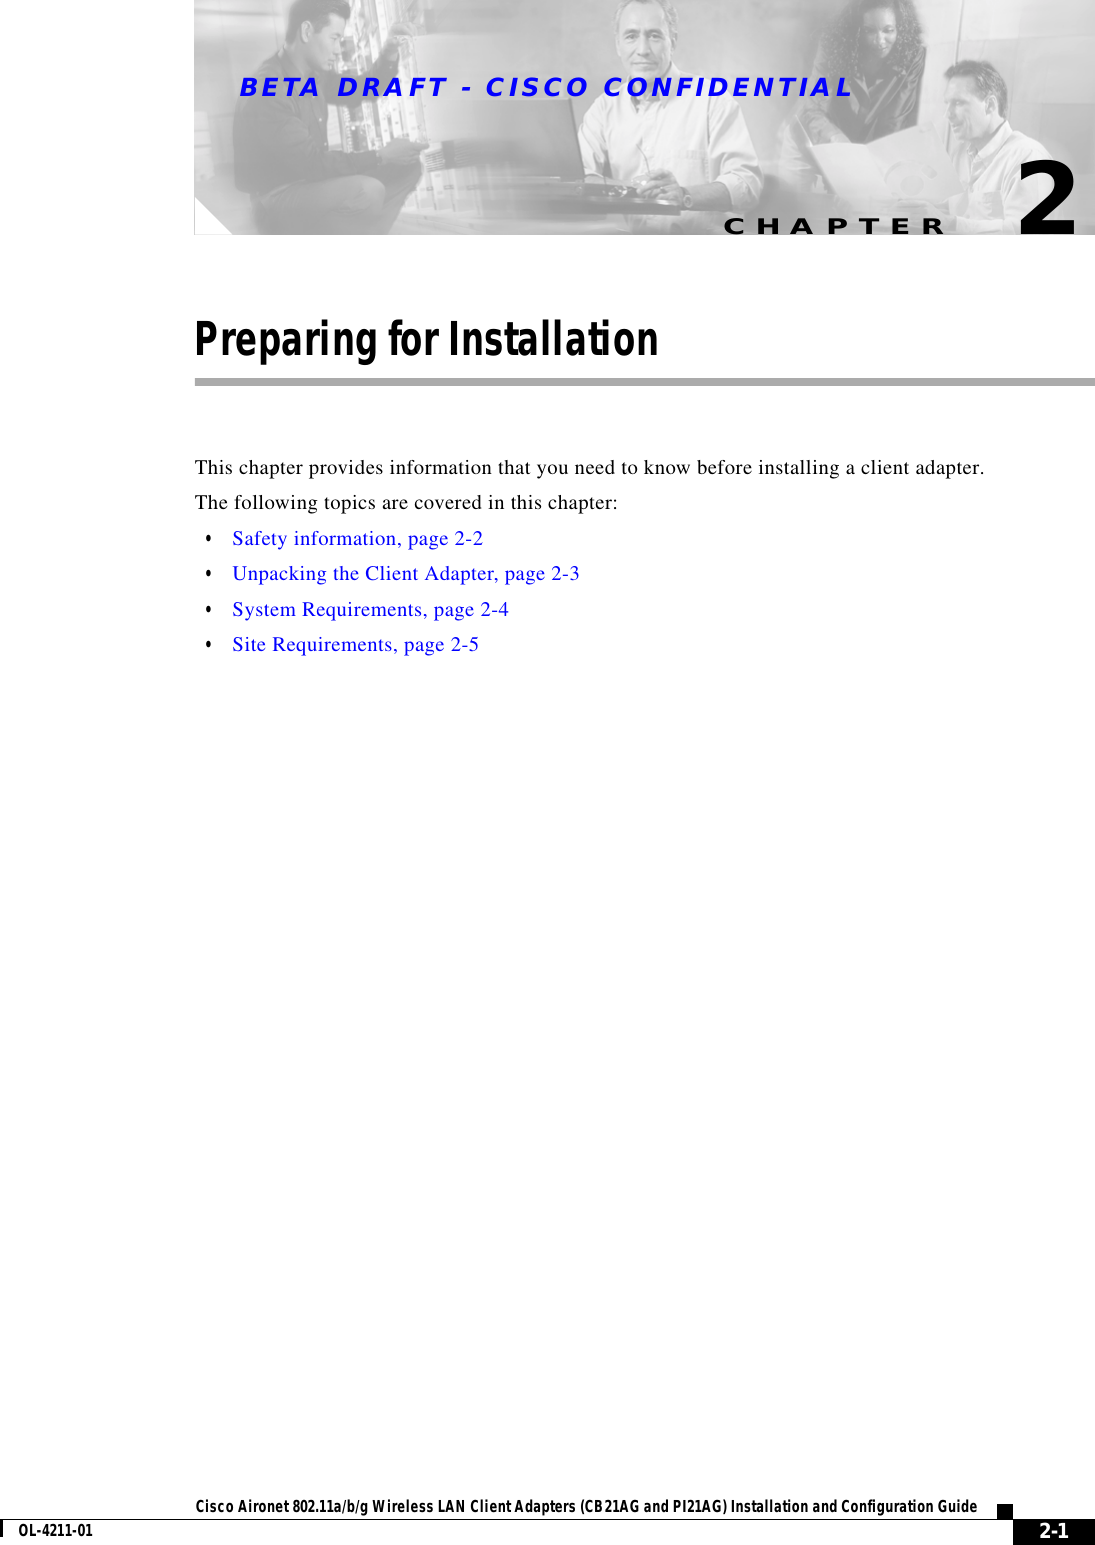 CHAPTERBETA DRAFT - CISCO CONFIDENTIAL2-1Cisco Aironet 802.11a/b/g Wireless LAN Client Adapters (CB21AG and PI21AG) Installation and Configuration GuideOL-4211-012Preparing for InstallationThis chapter provides information that you need to know before installing a client adapter.The following topics are covered in this chapter:•Safety information, page 2-2•Unpacking the Client Adapter, page 2-3•System Requirements, page 2-4•Site Requirements, page 2-5